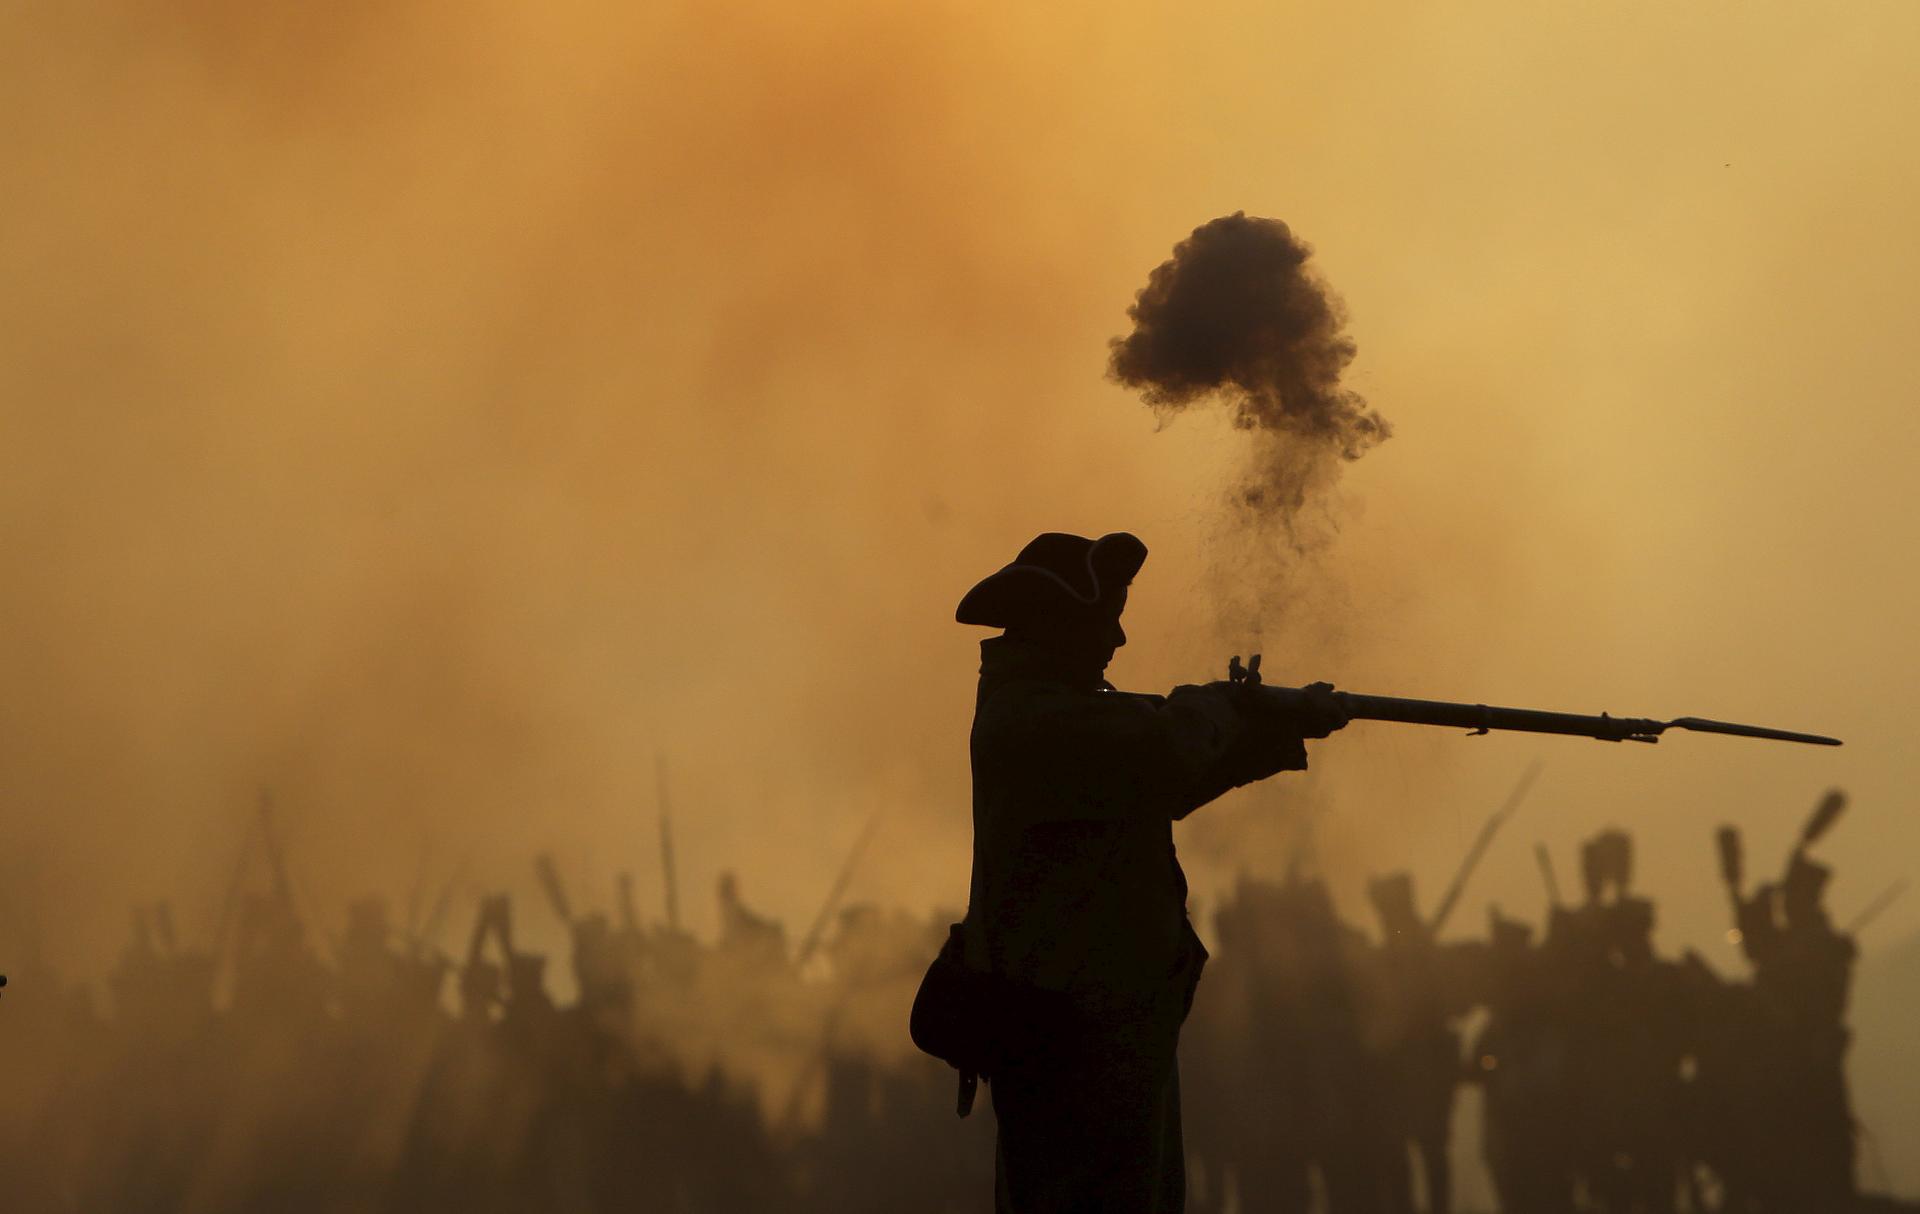 A history enthusiast, dressed as a soldier, fights during the re-enactment of Napoleon's famous battle of Austerlitz.